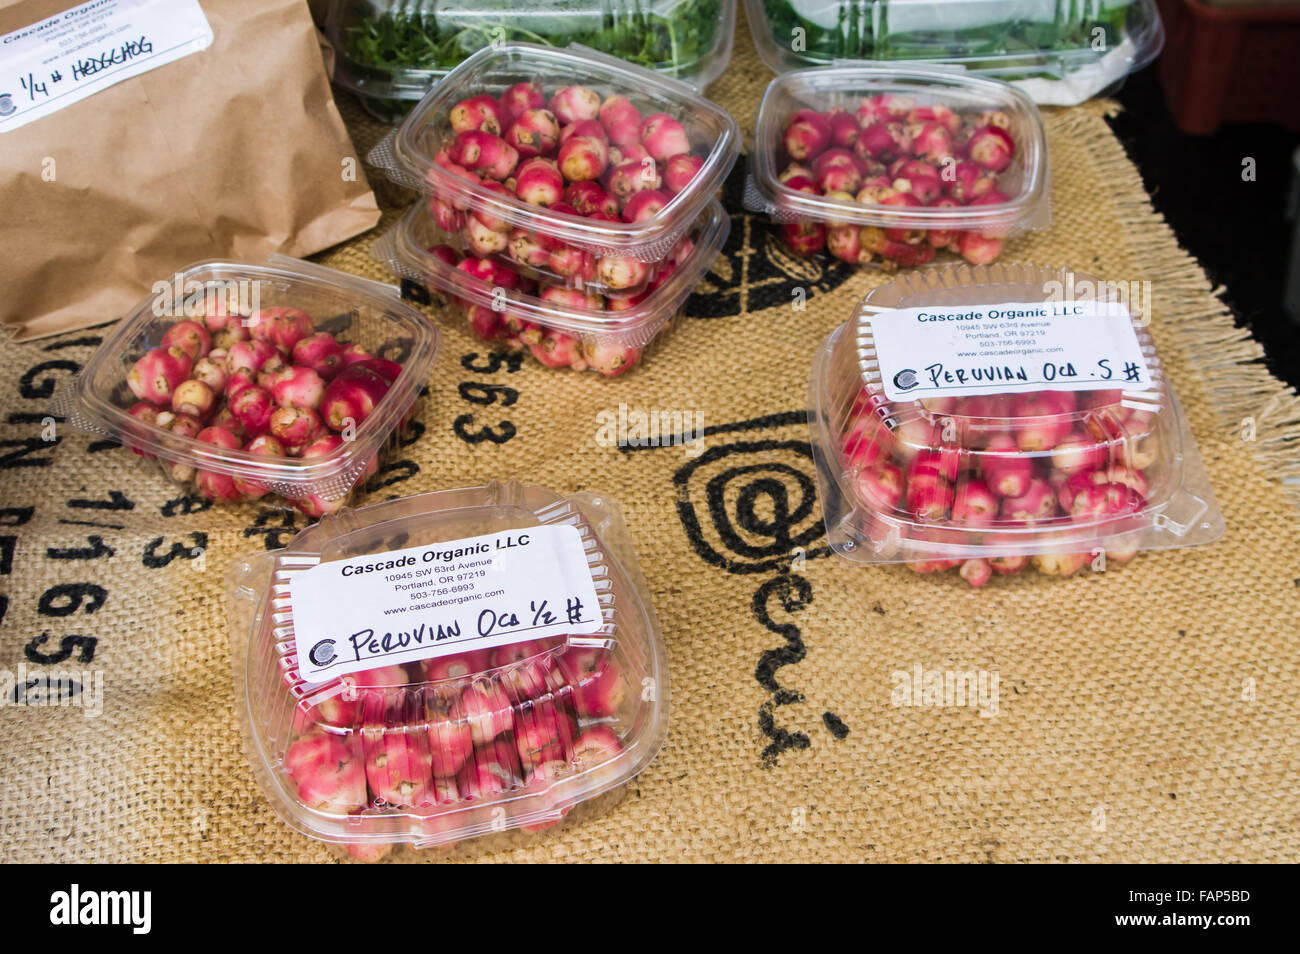 Packages of Peruvian Oca tubers on display for sale at a market stall in Beaverton, Oregon, USA Stock Photo